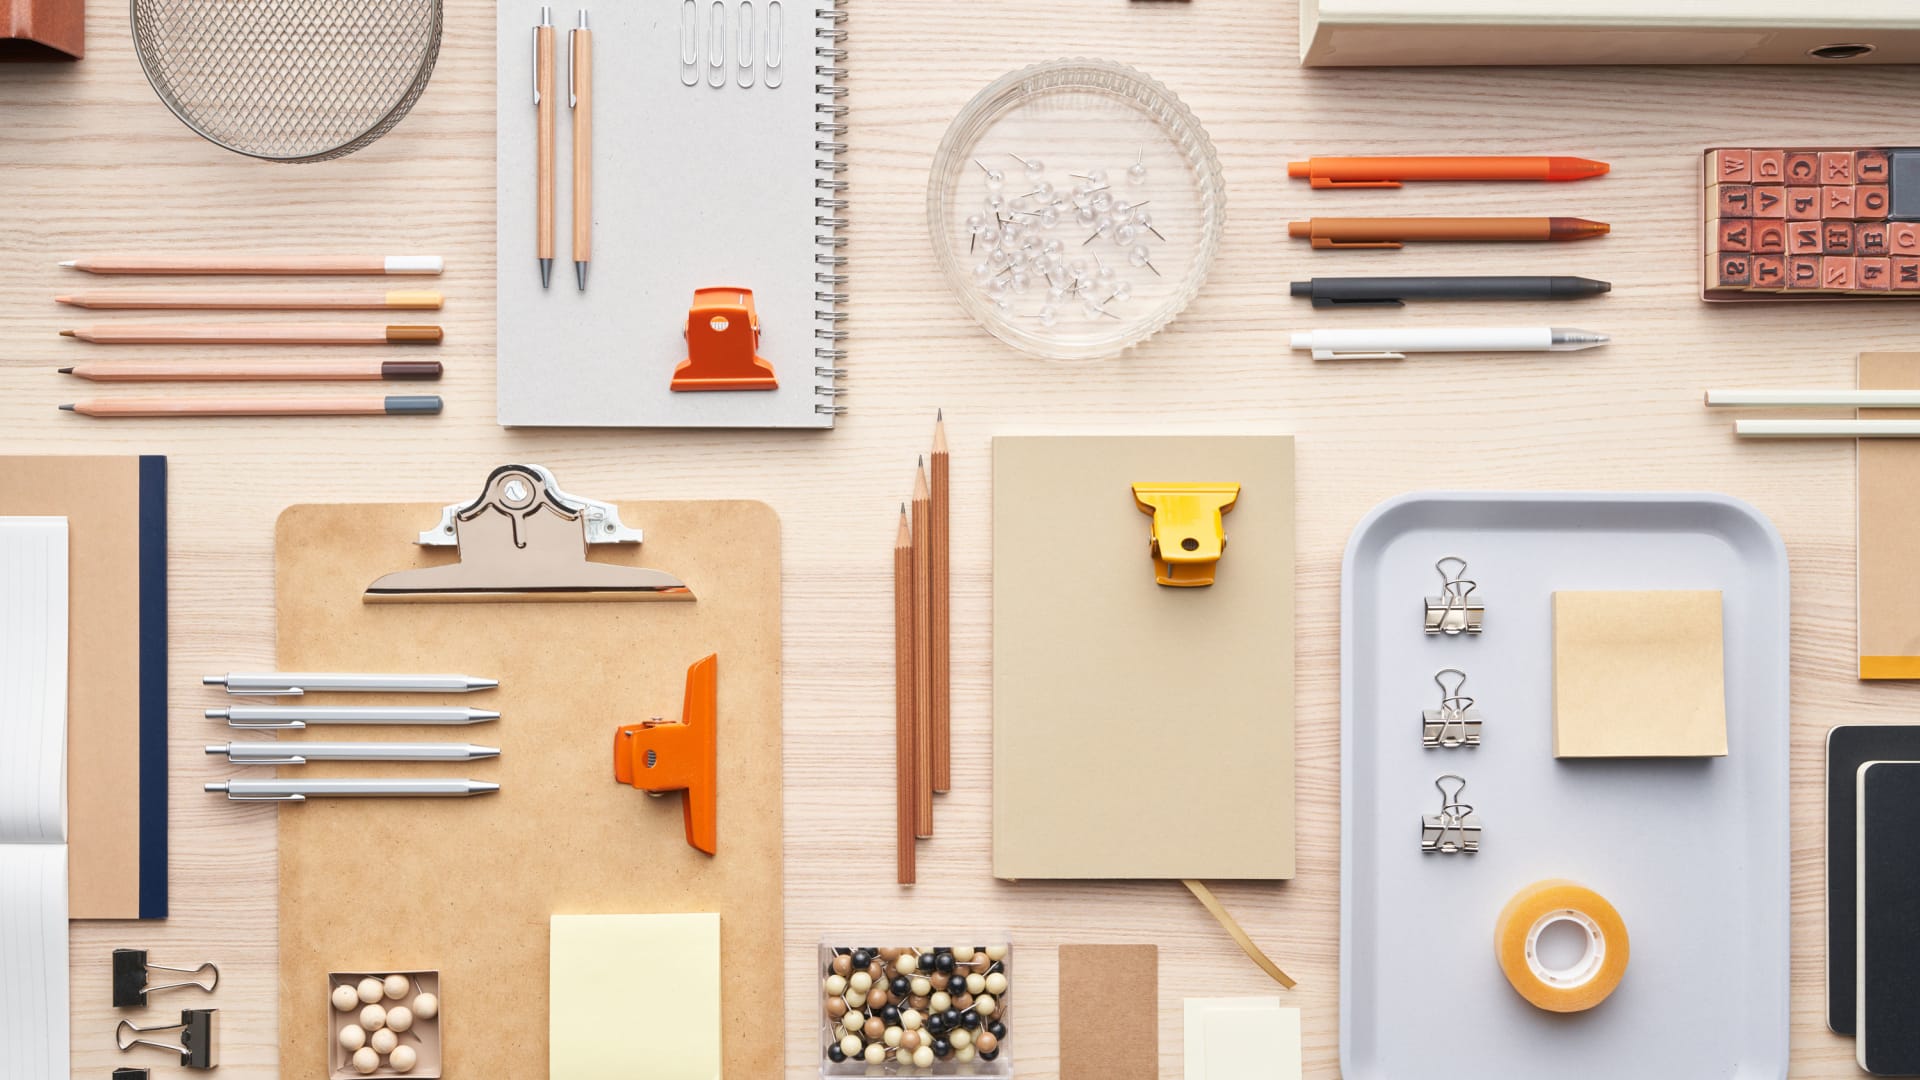 3 Commonly Overlooked Office Organization Systems You Won't Want to Ignore